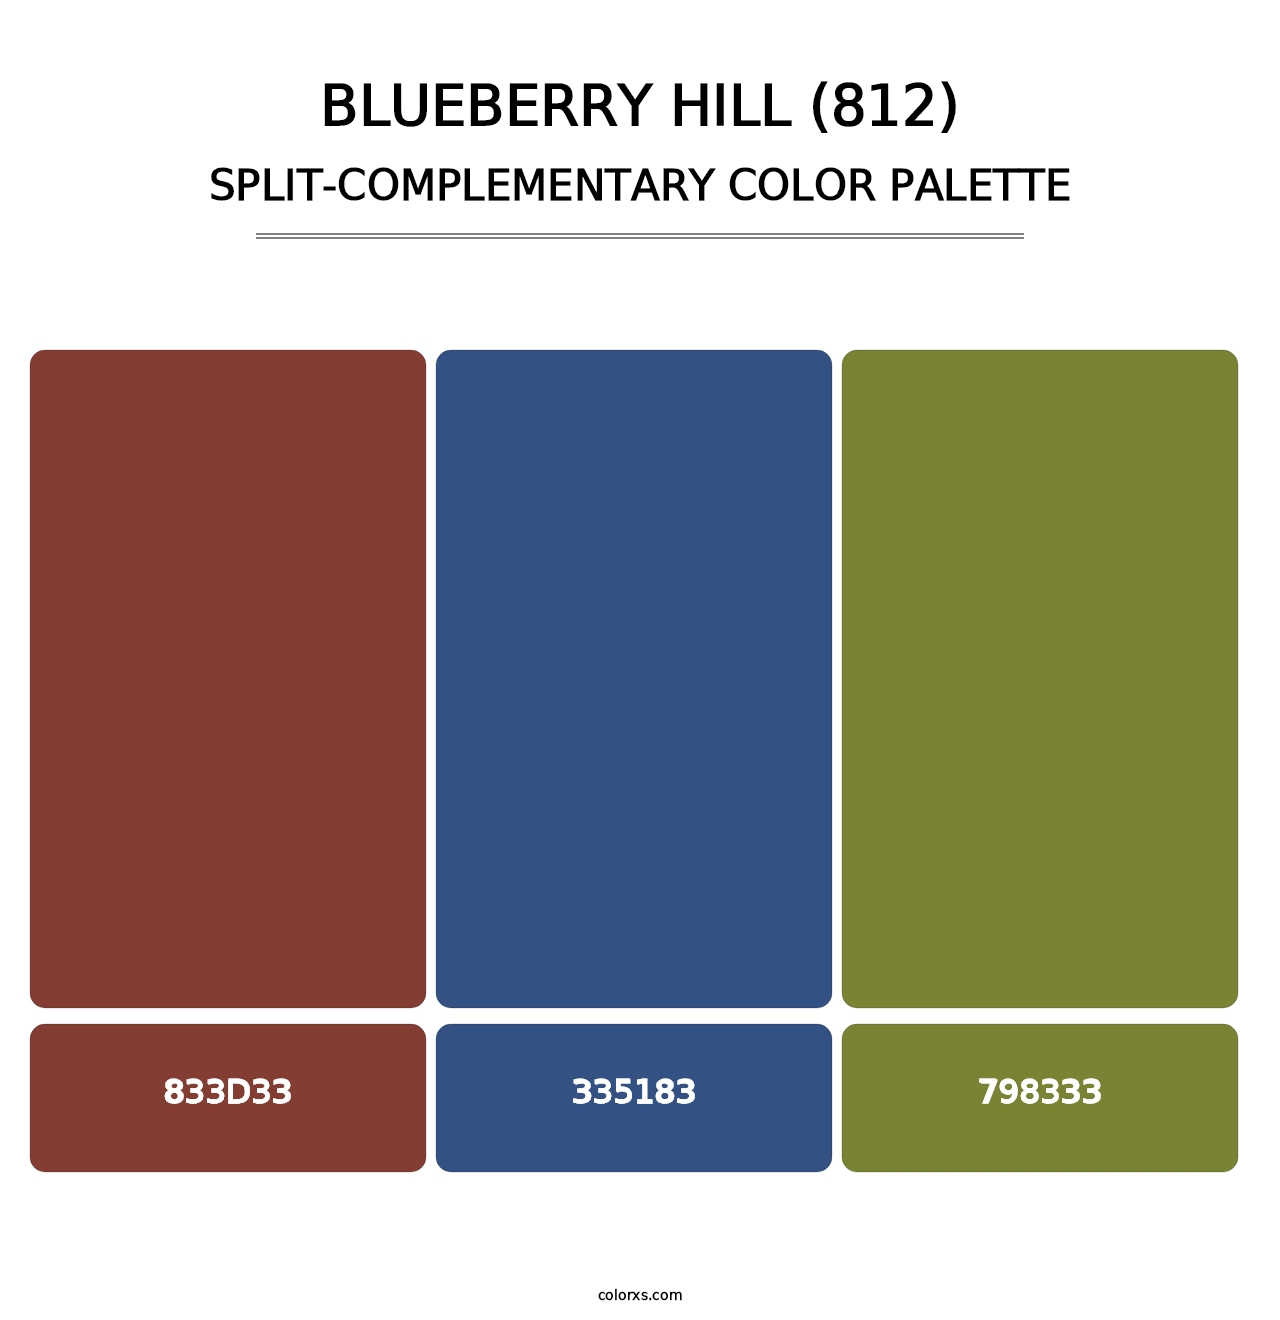 Blueberry Hill (812) - Split-Complementary Color Palette